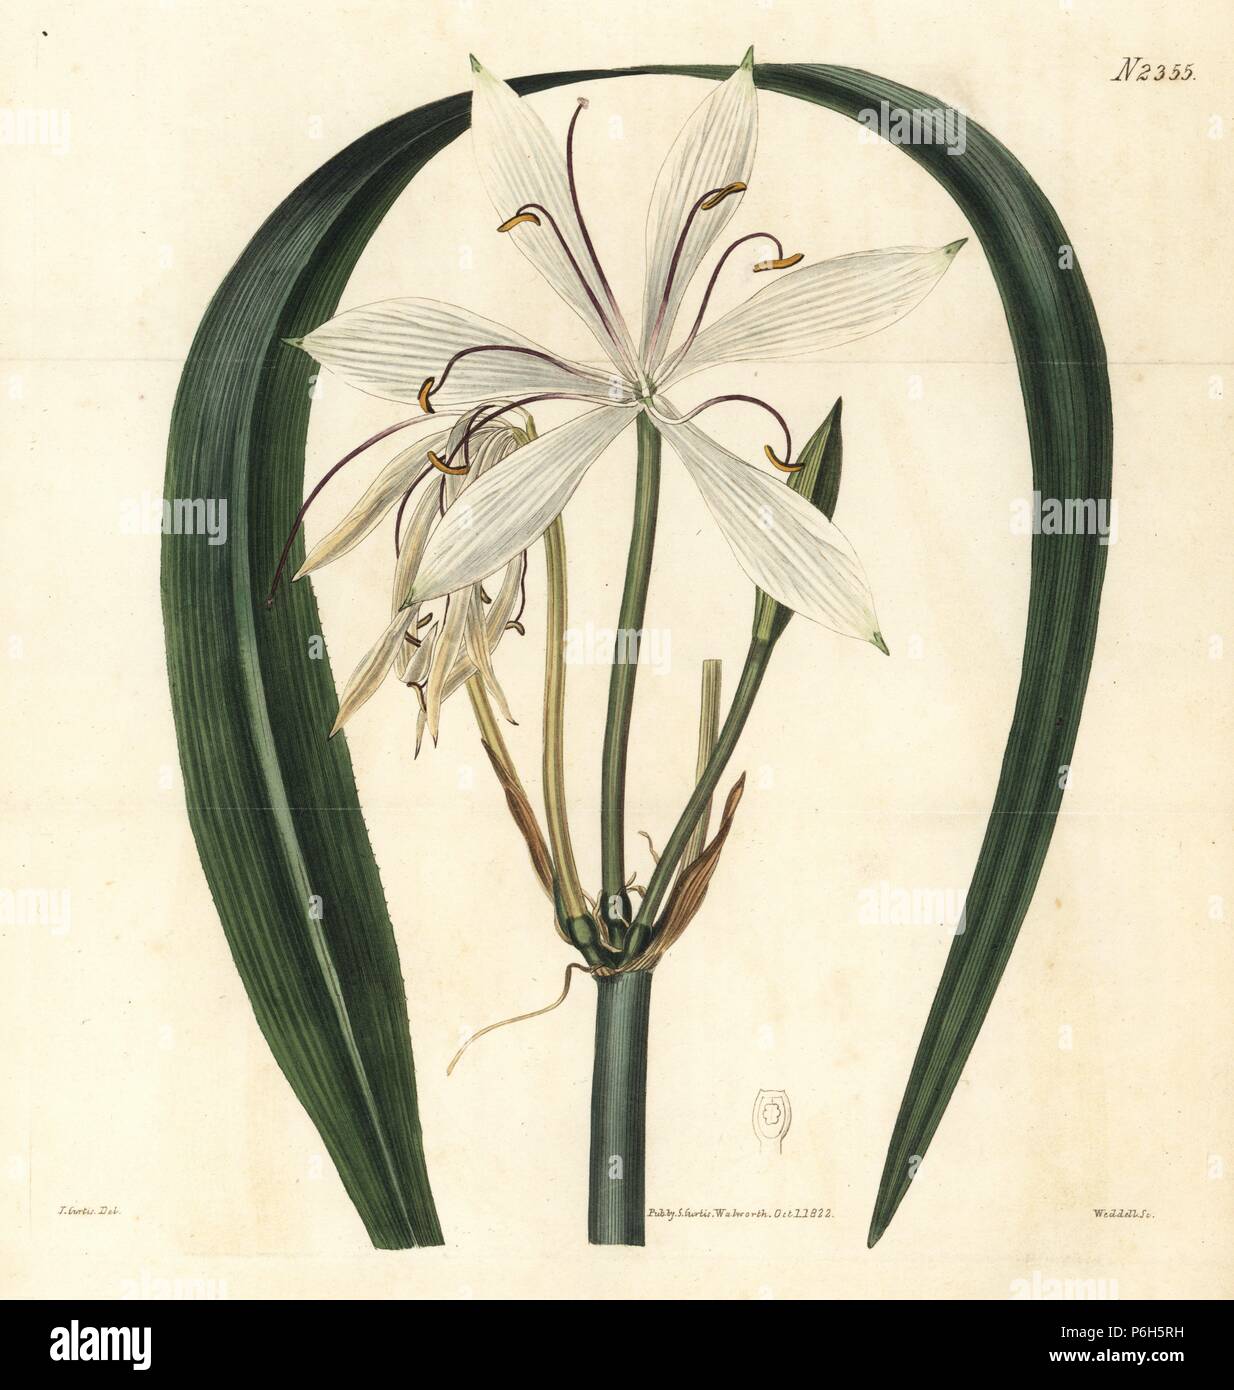 Water island sand crinum, Crinum arenarium. Handcoloured copperplate engraving by Weddell after an illustration by John Curtis from Samuel Curtis's 'Botanical Magazine,' London, 1822. Stock Photo